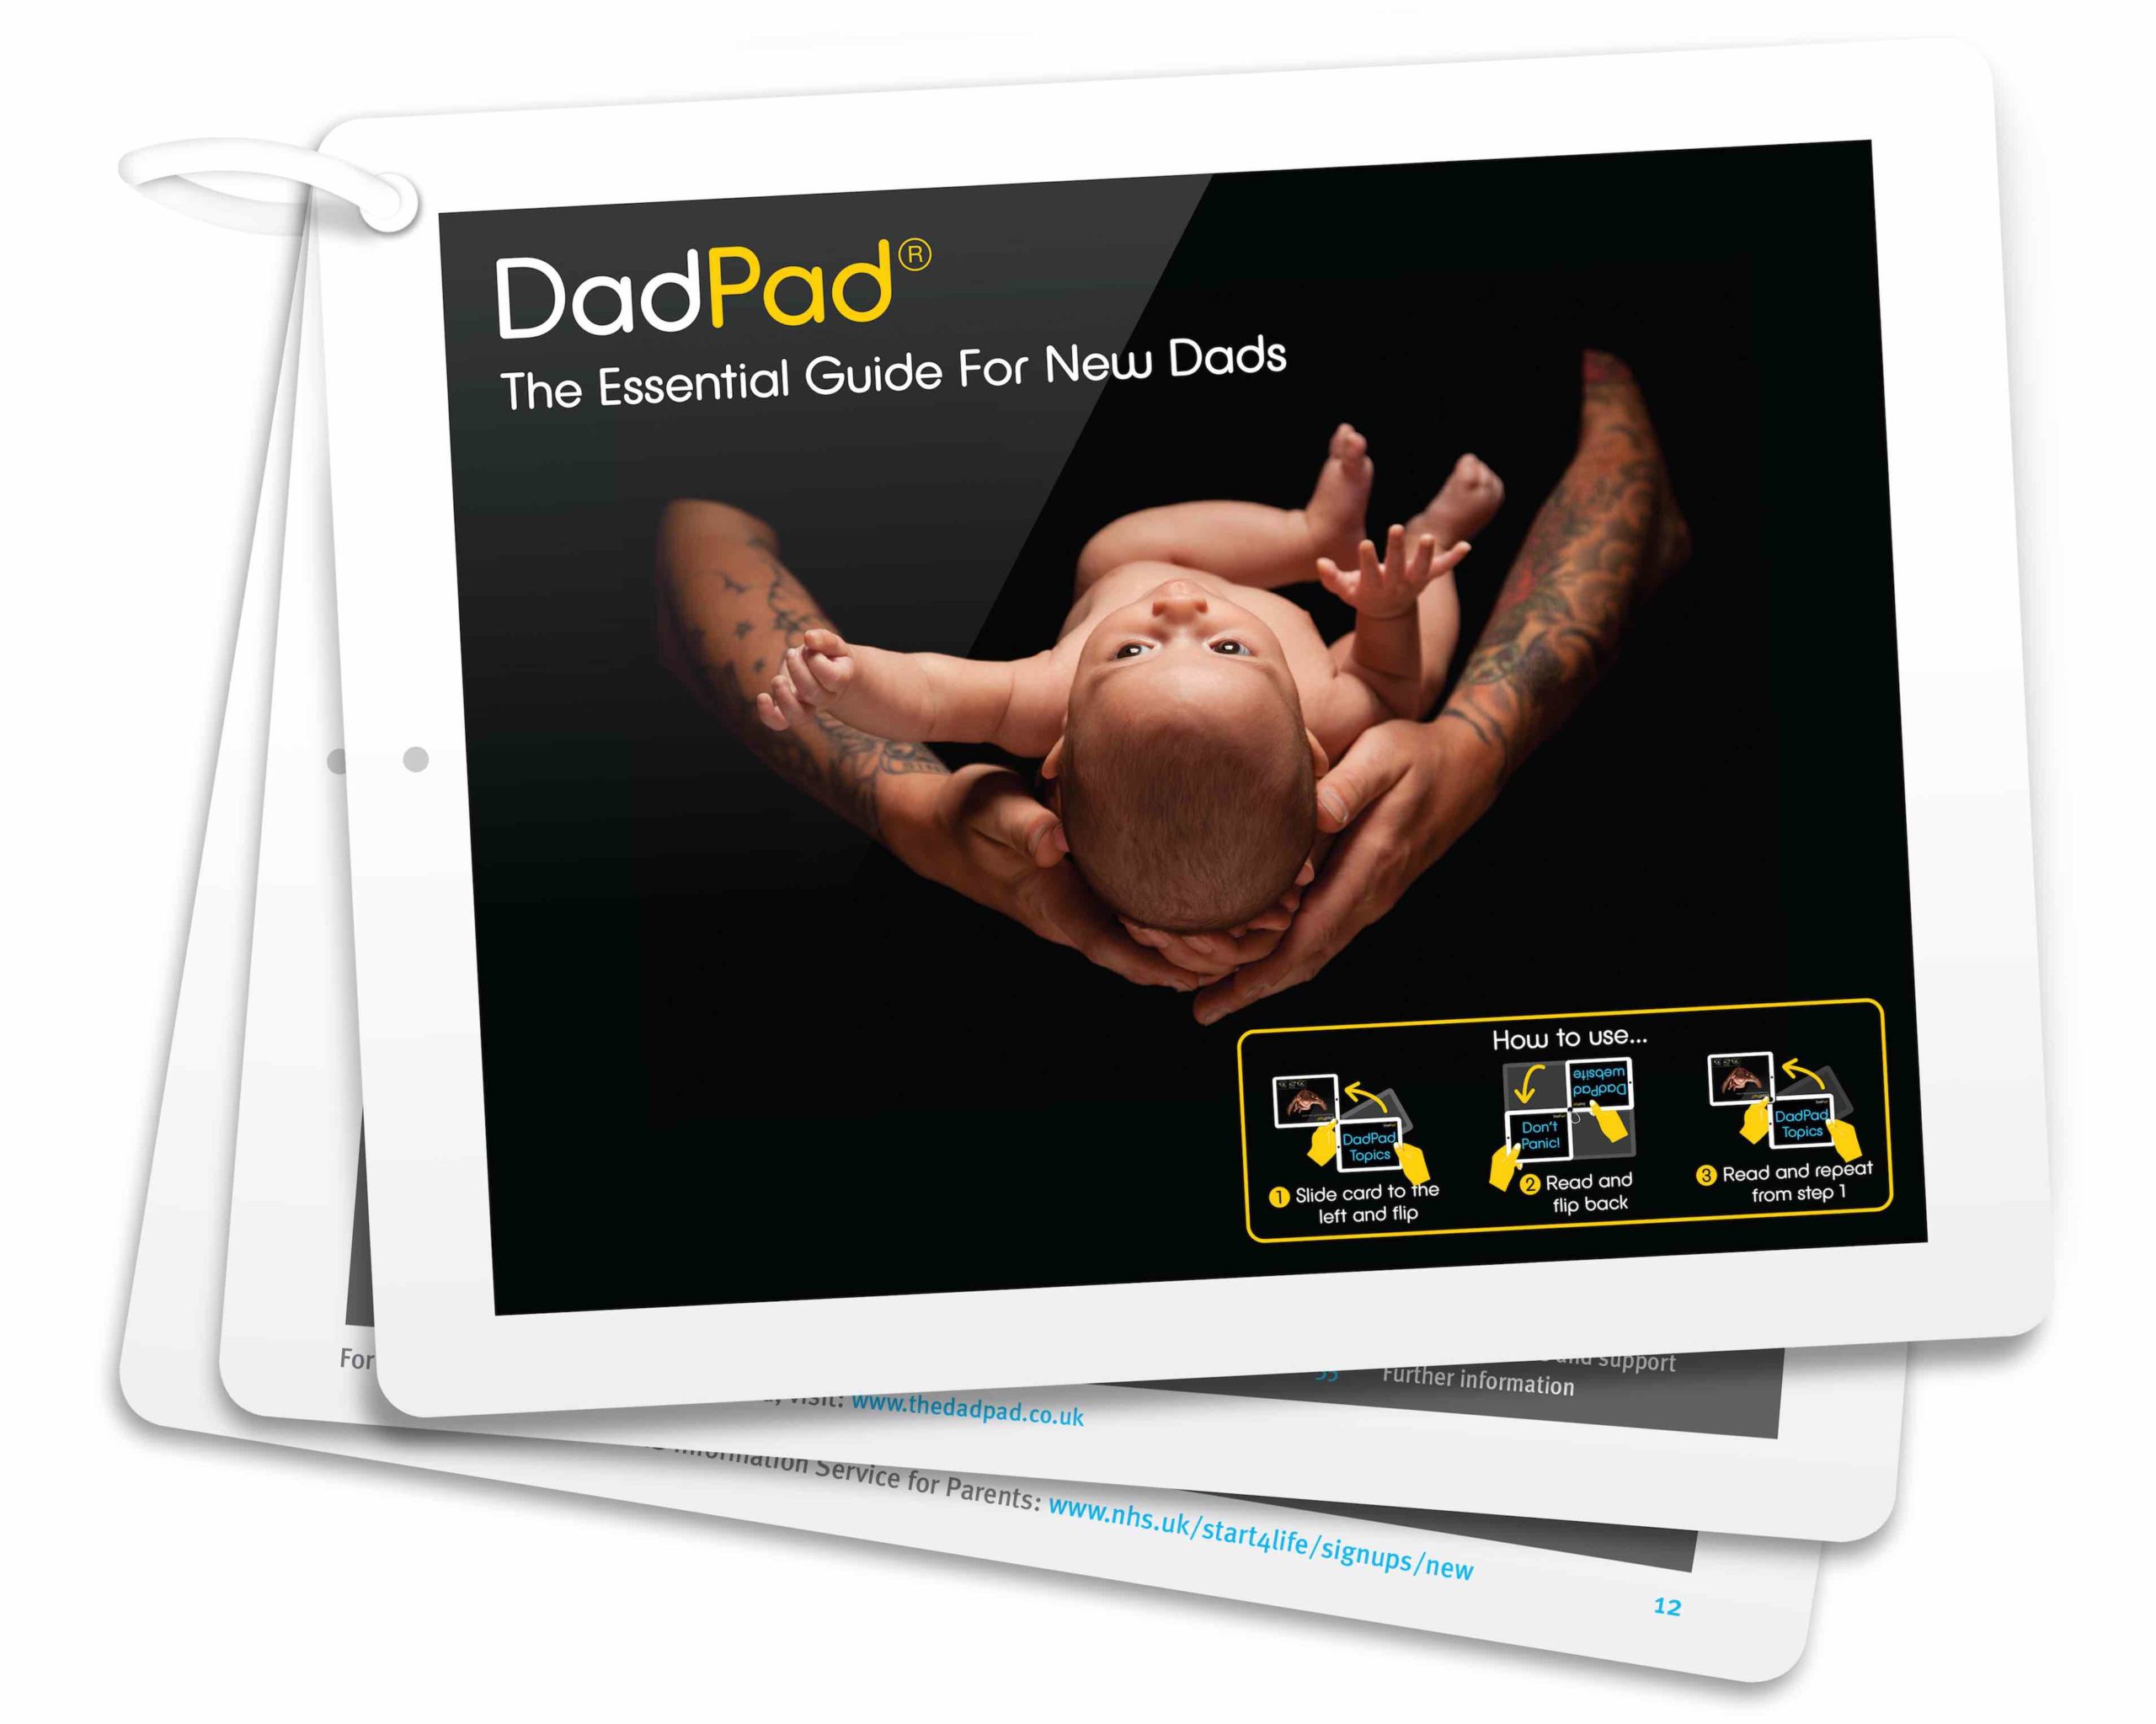 New app launched to help new dads and dads-to-be with parenting skills in Derbyshire